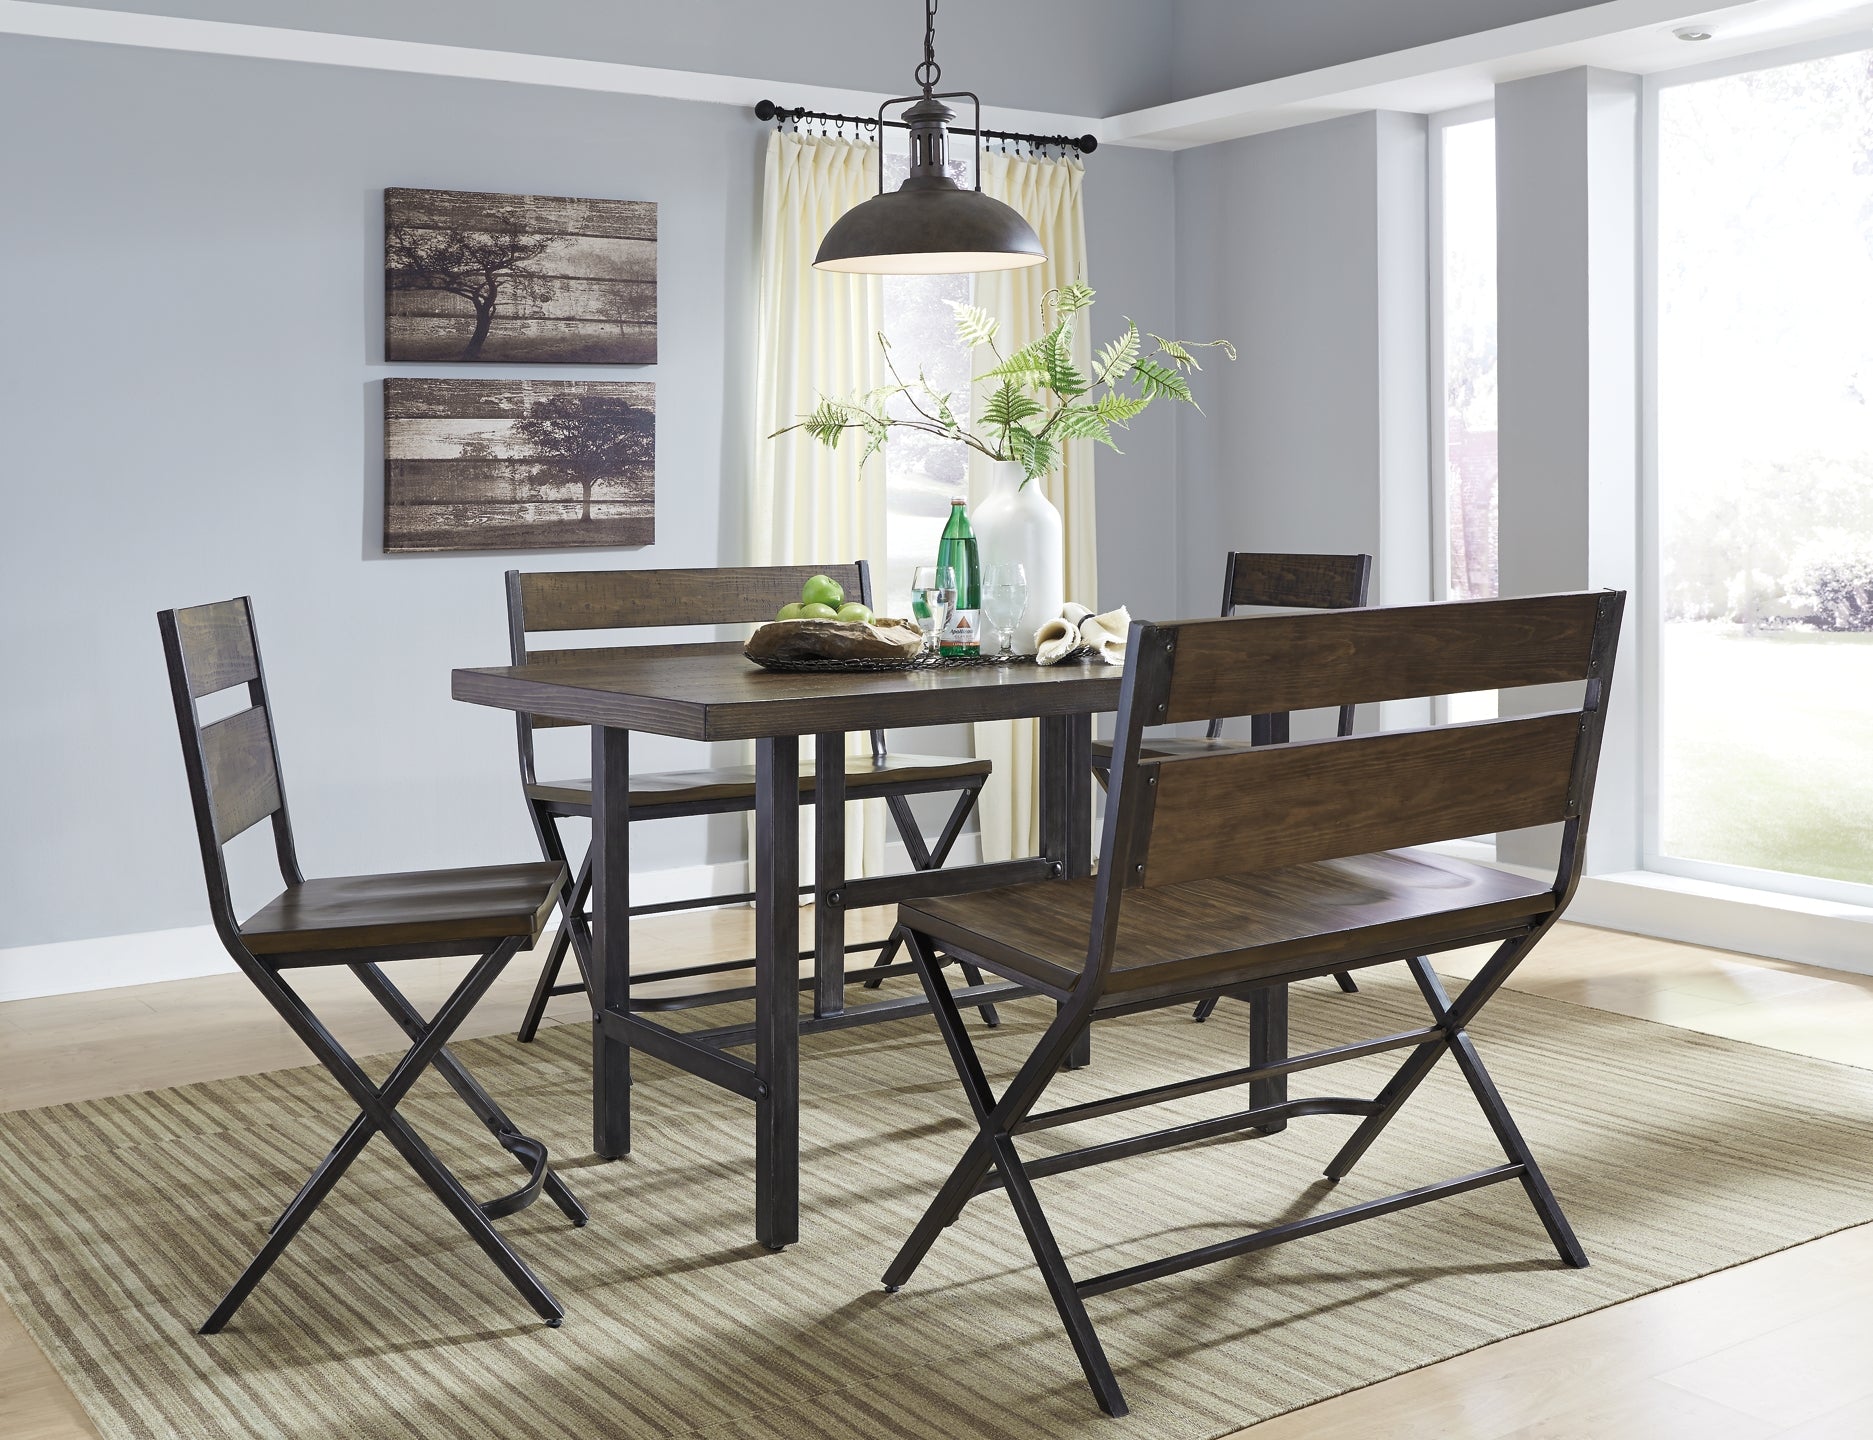 Kavara Counter Height Dining Table and 2 Barstools and 2 Benches Wilson Furniture (OH)  in Bridgeport, Ohio. Serving Bridgeport, Yorkville, Bellaire, & Avondale